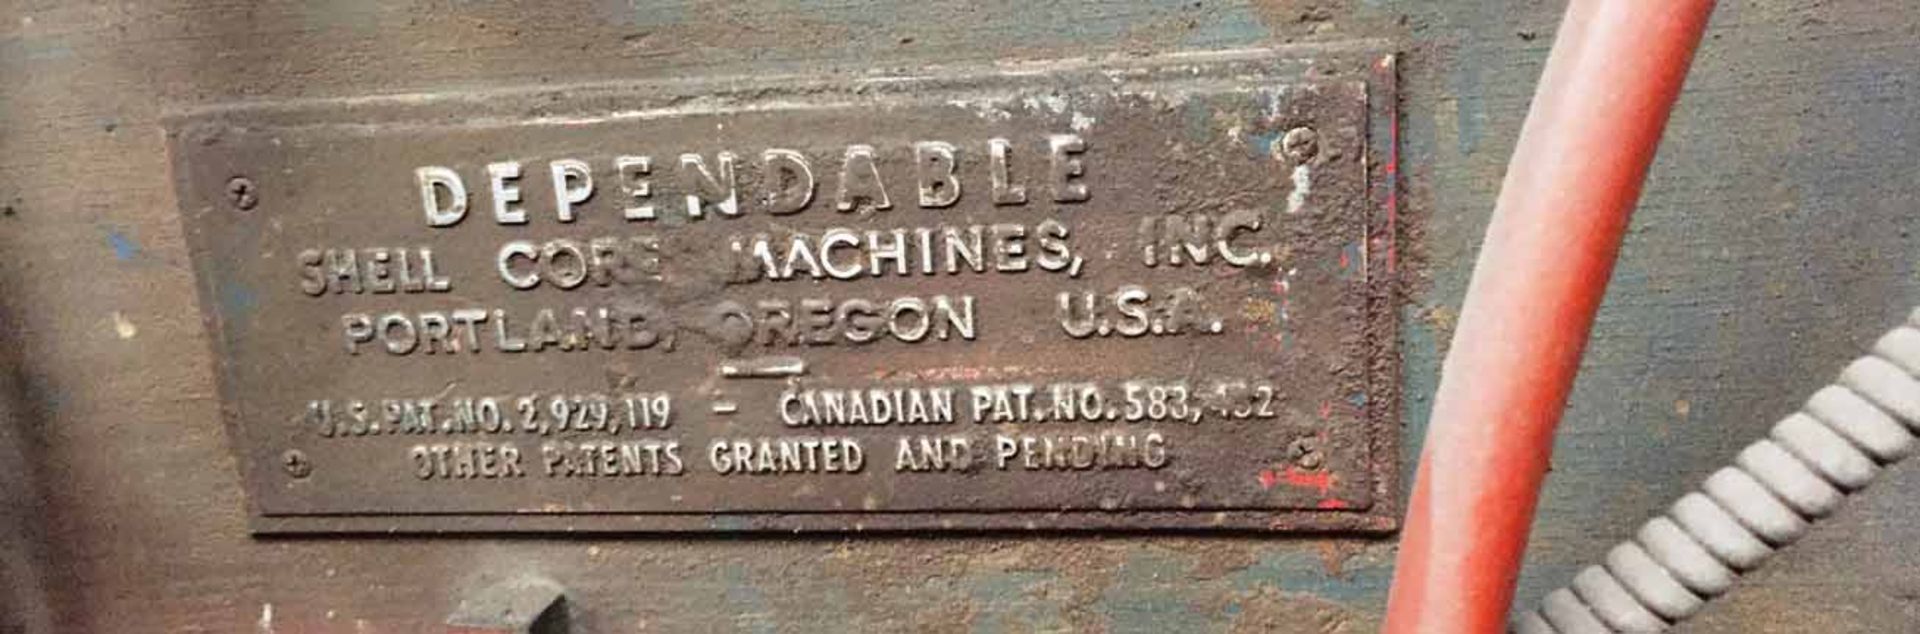 Dependable semi-automatic shell core machine, model 400, with control panel - Image 4 of 6